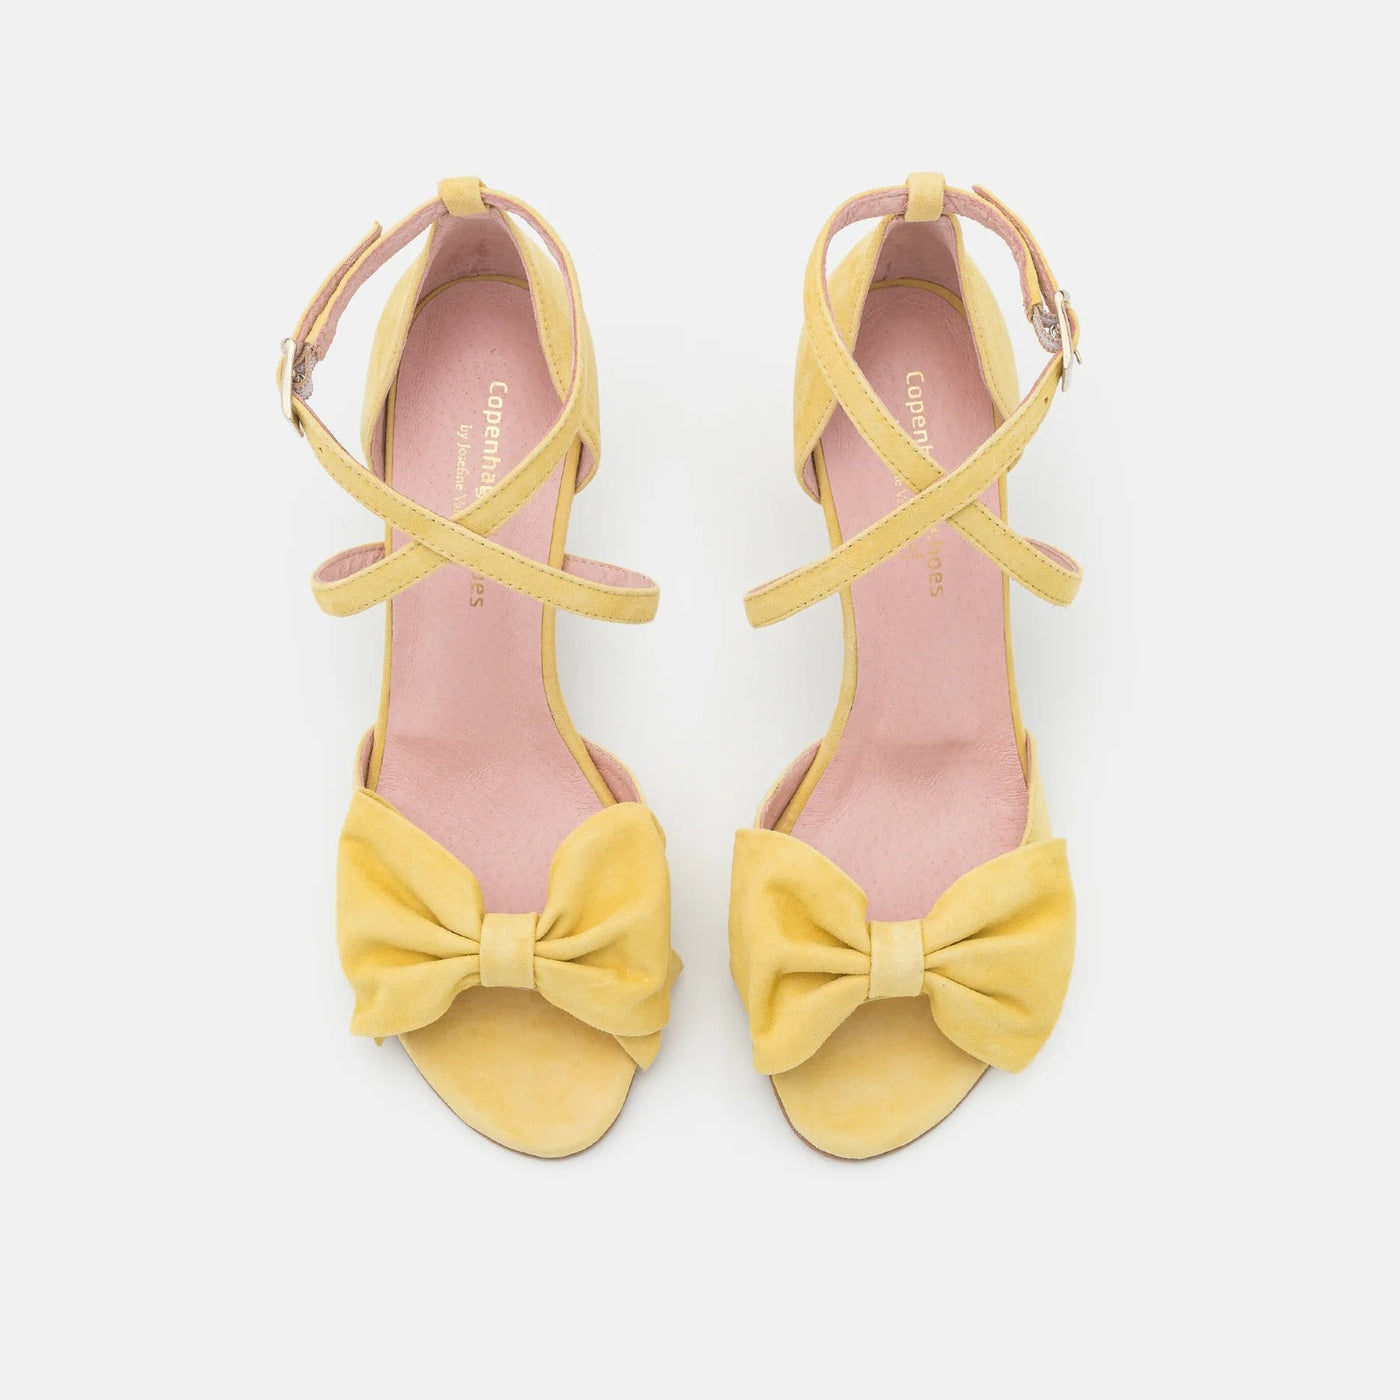 Gotstyle Fashion - Copenhagen Shoes Shoes Suede Stiletto Sandal with Bow - Yellow